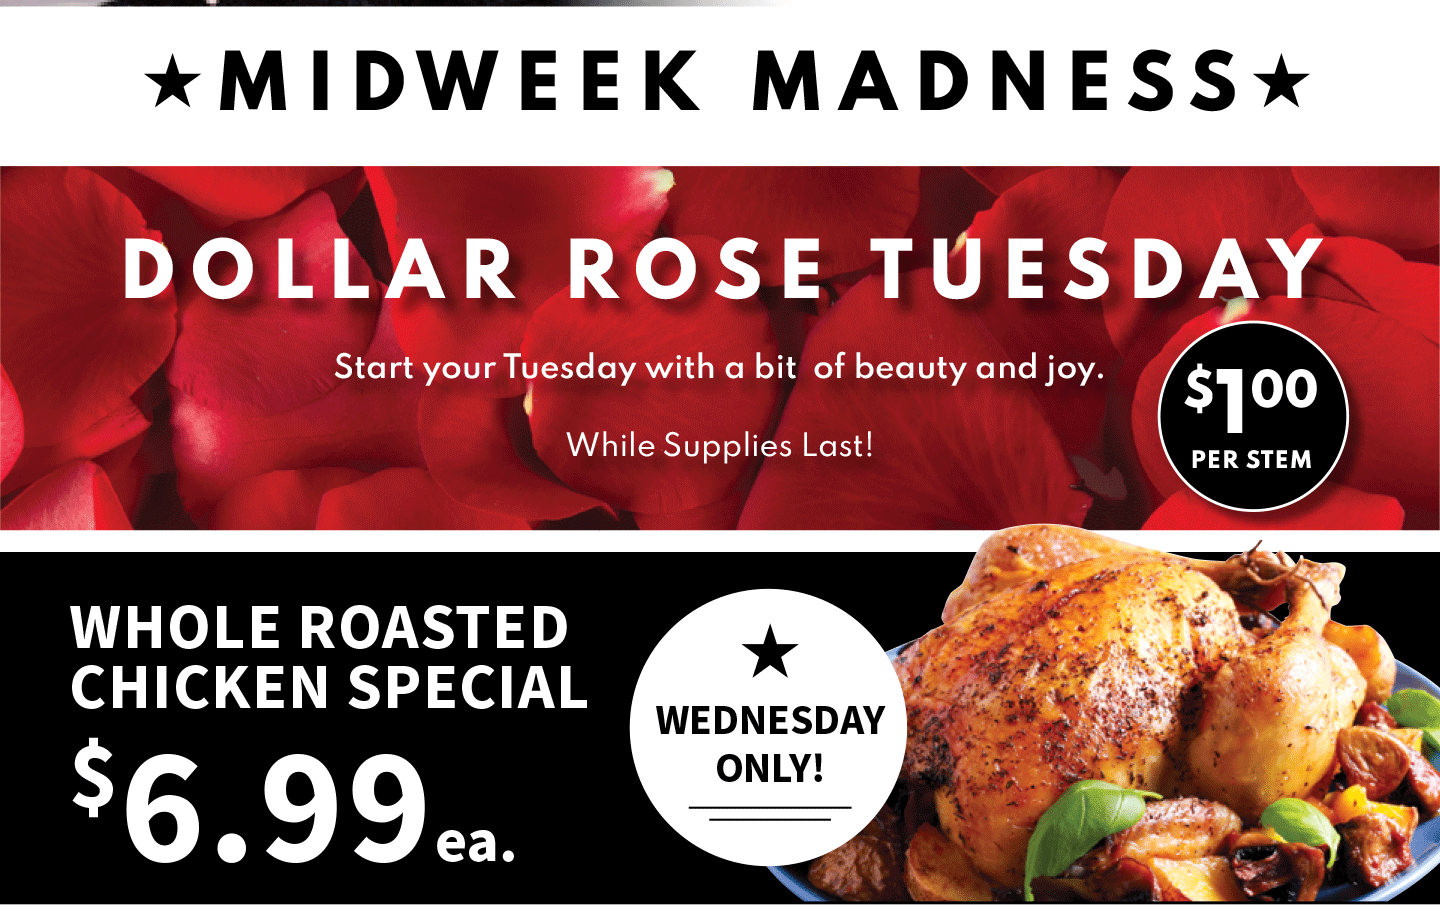 Dollar Rose Tueday $1 per stem, and WHole roasted Chicken Special $6.99 ea